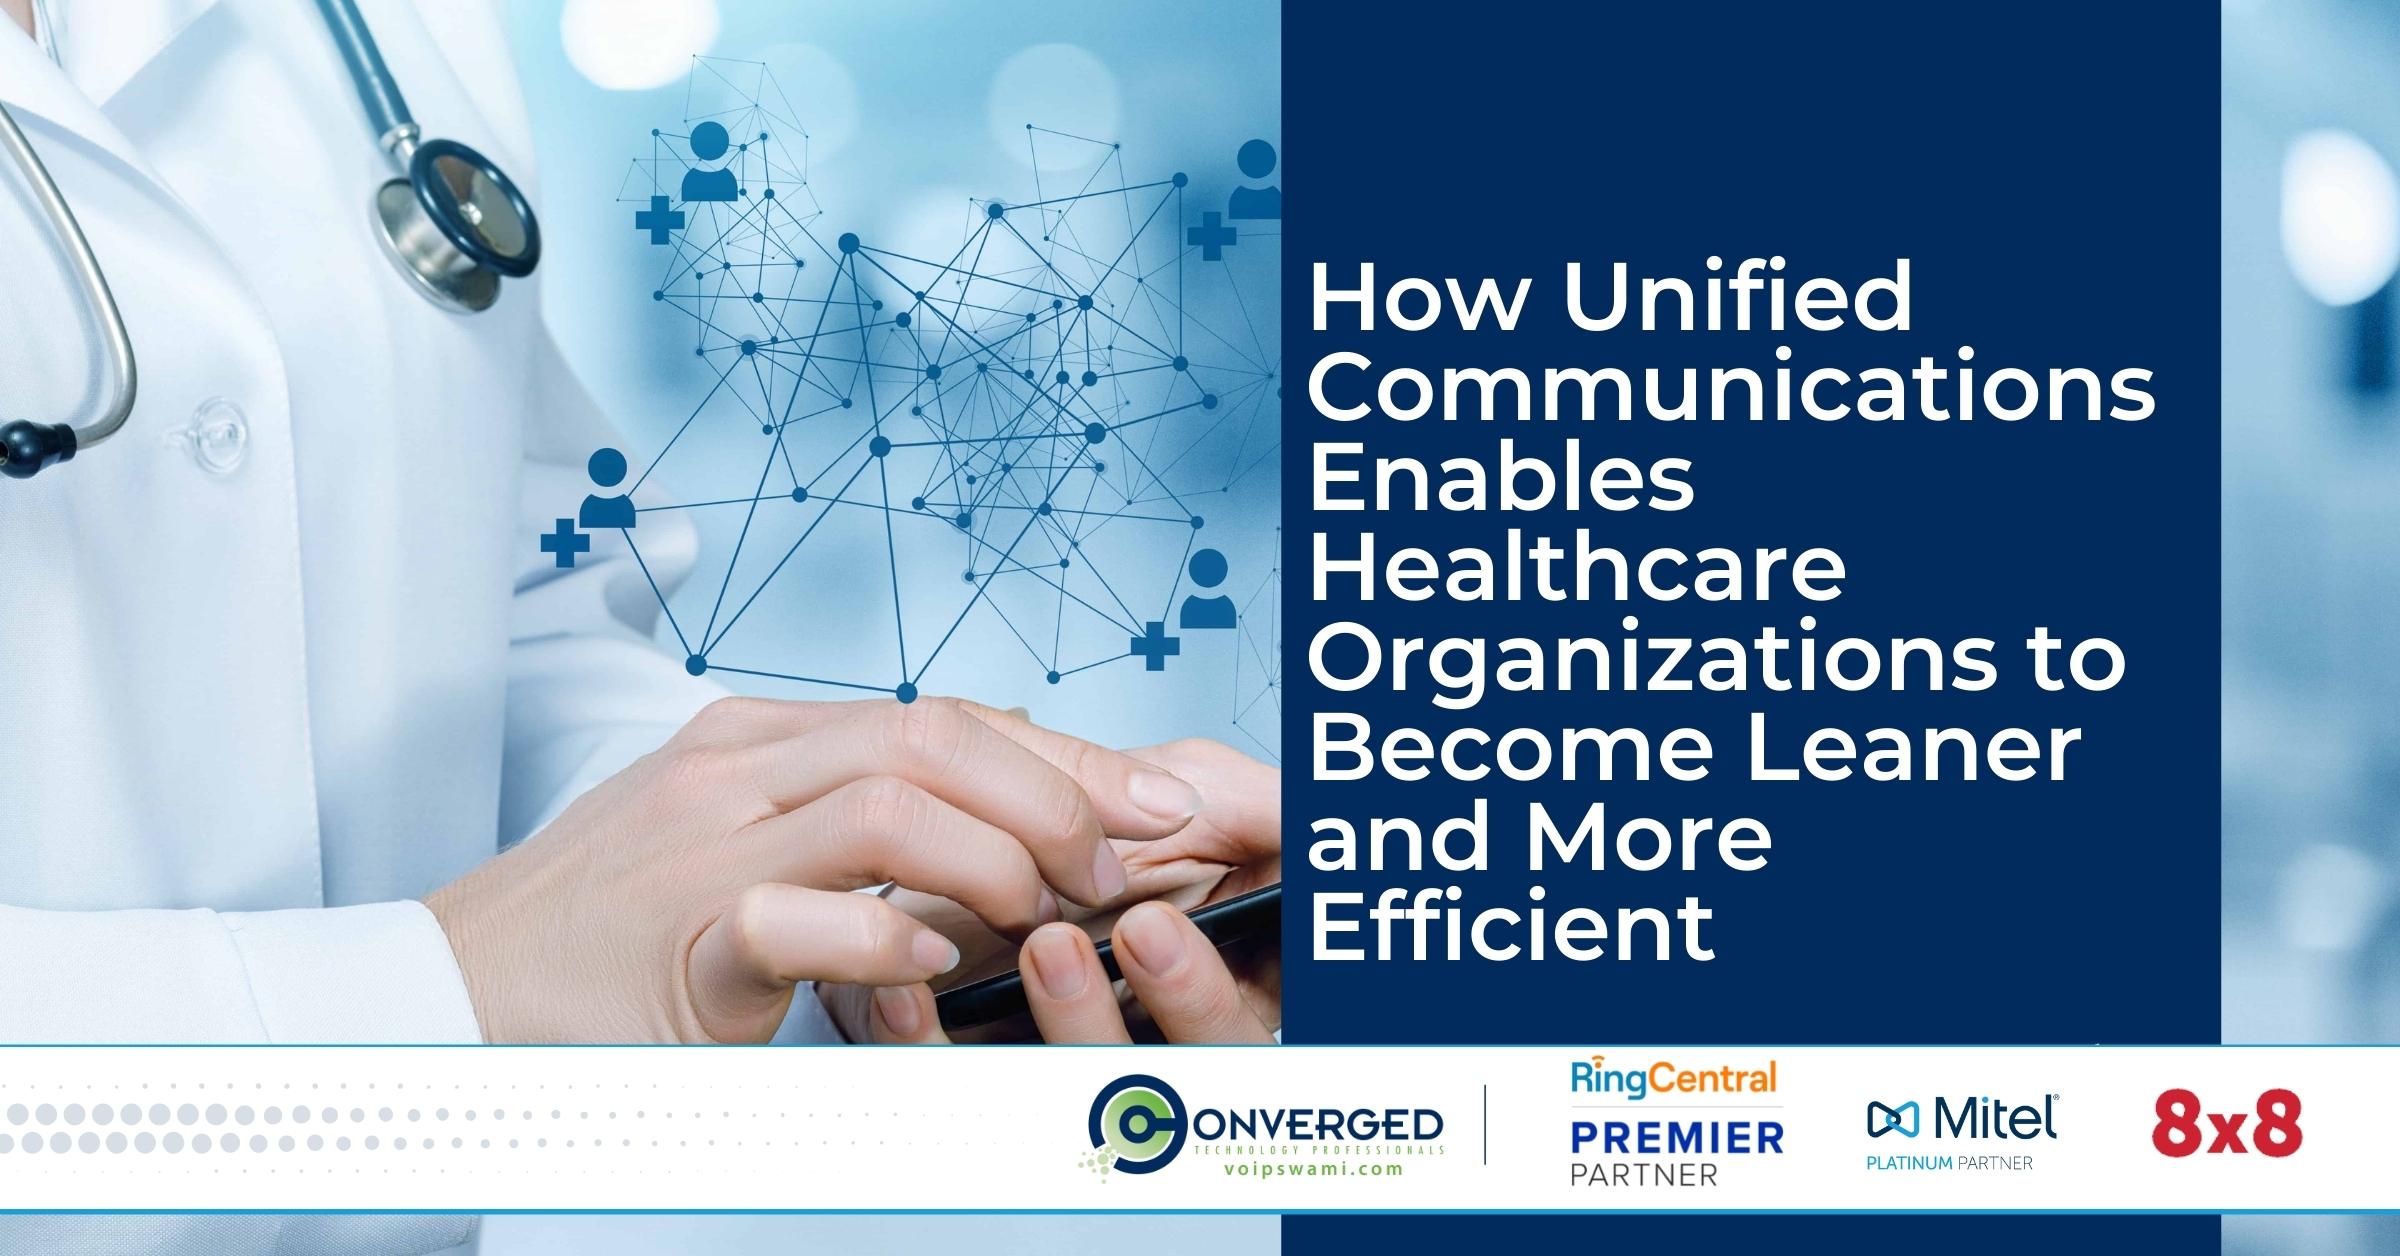 How Unified Communications Enables Healthcare Organizations to Become Leaner and More Efficient